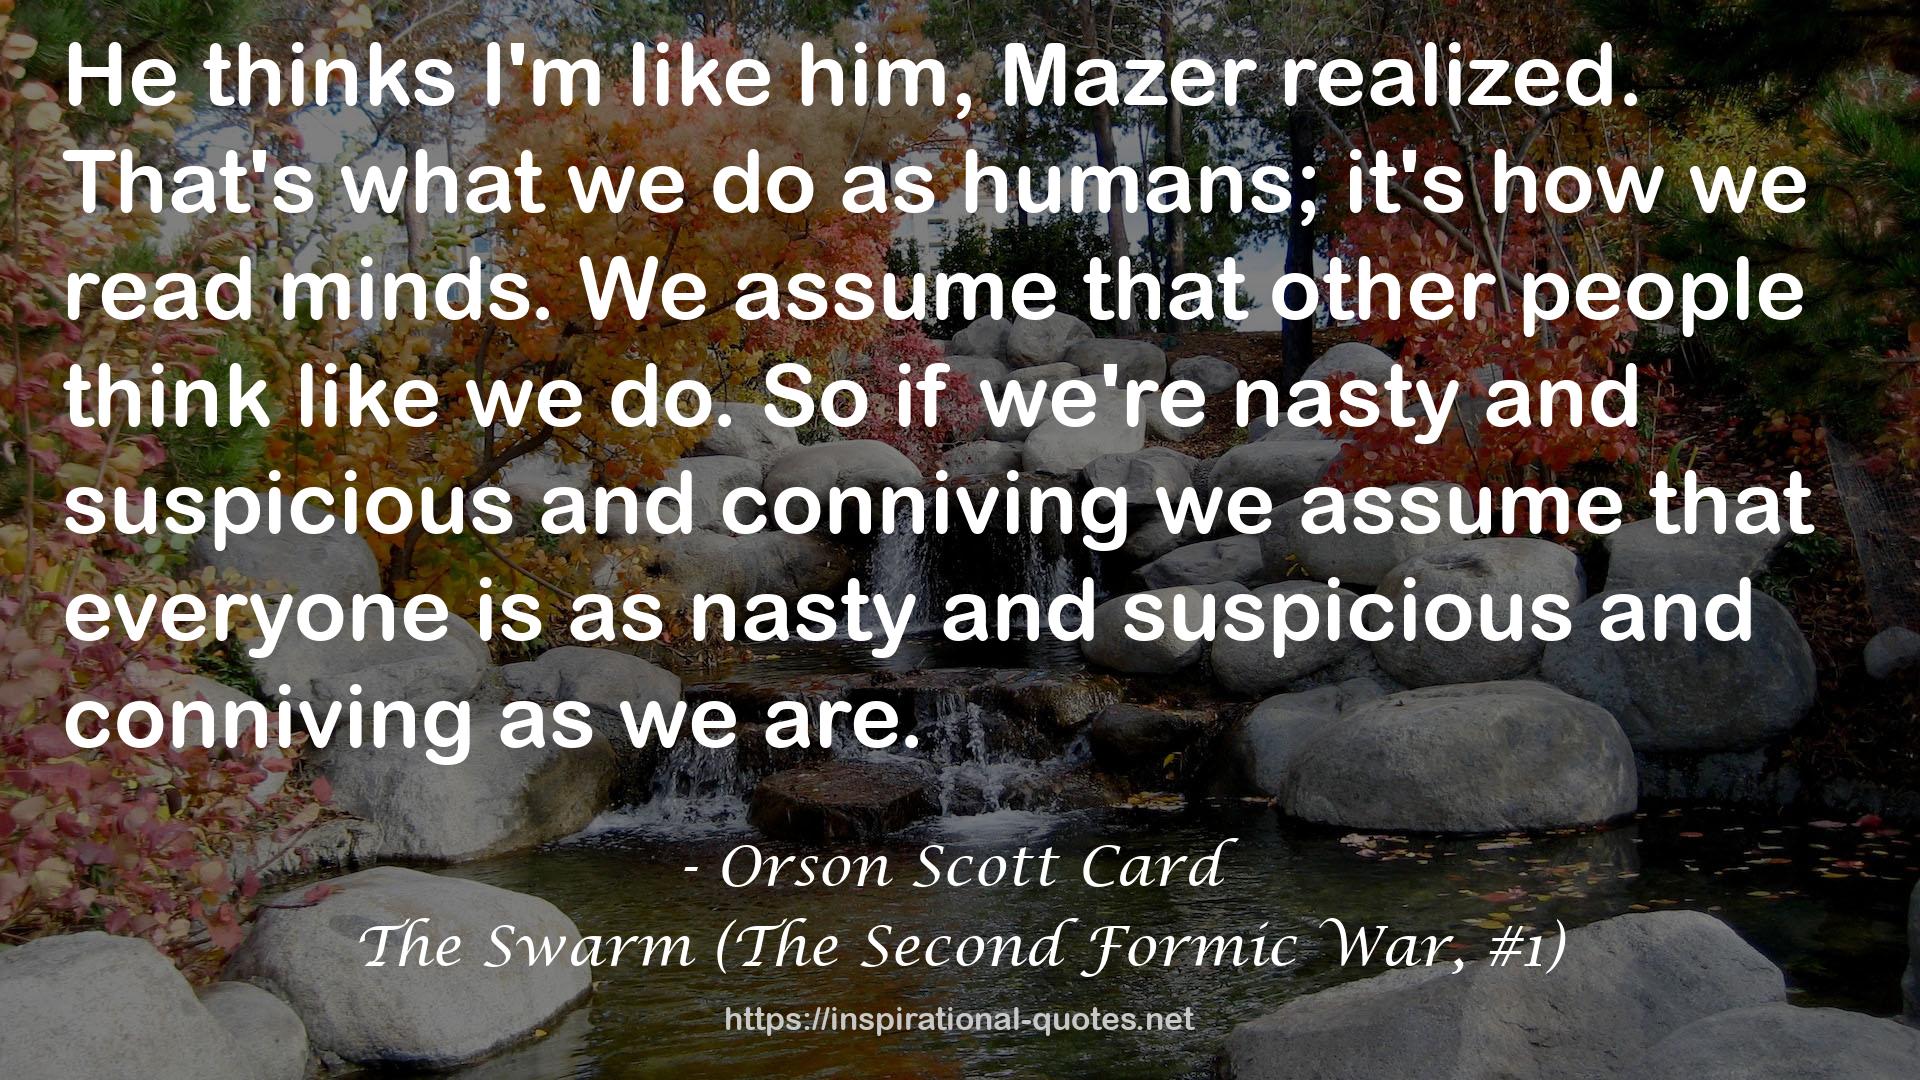 The Swarm (The Second Formic War, #1) QUOTES